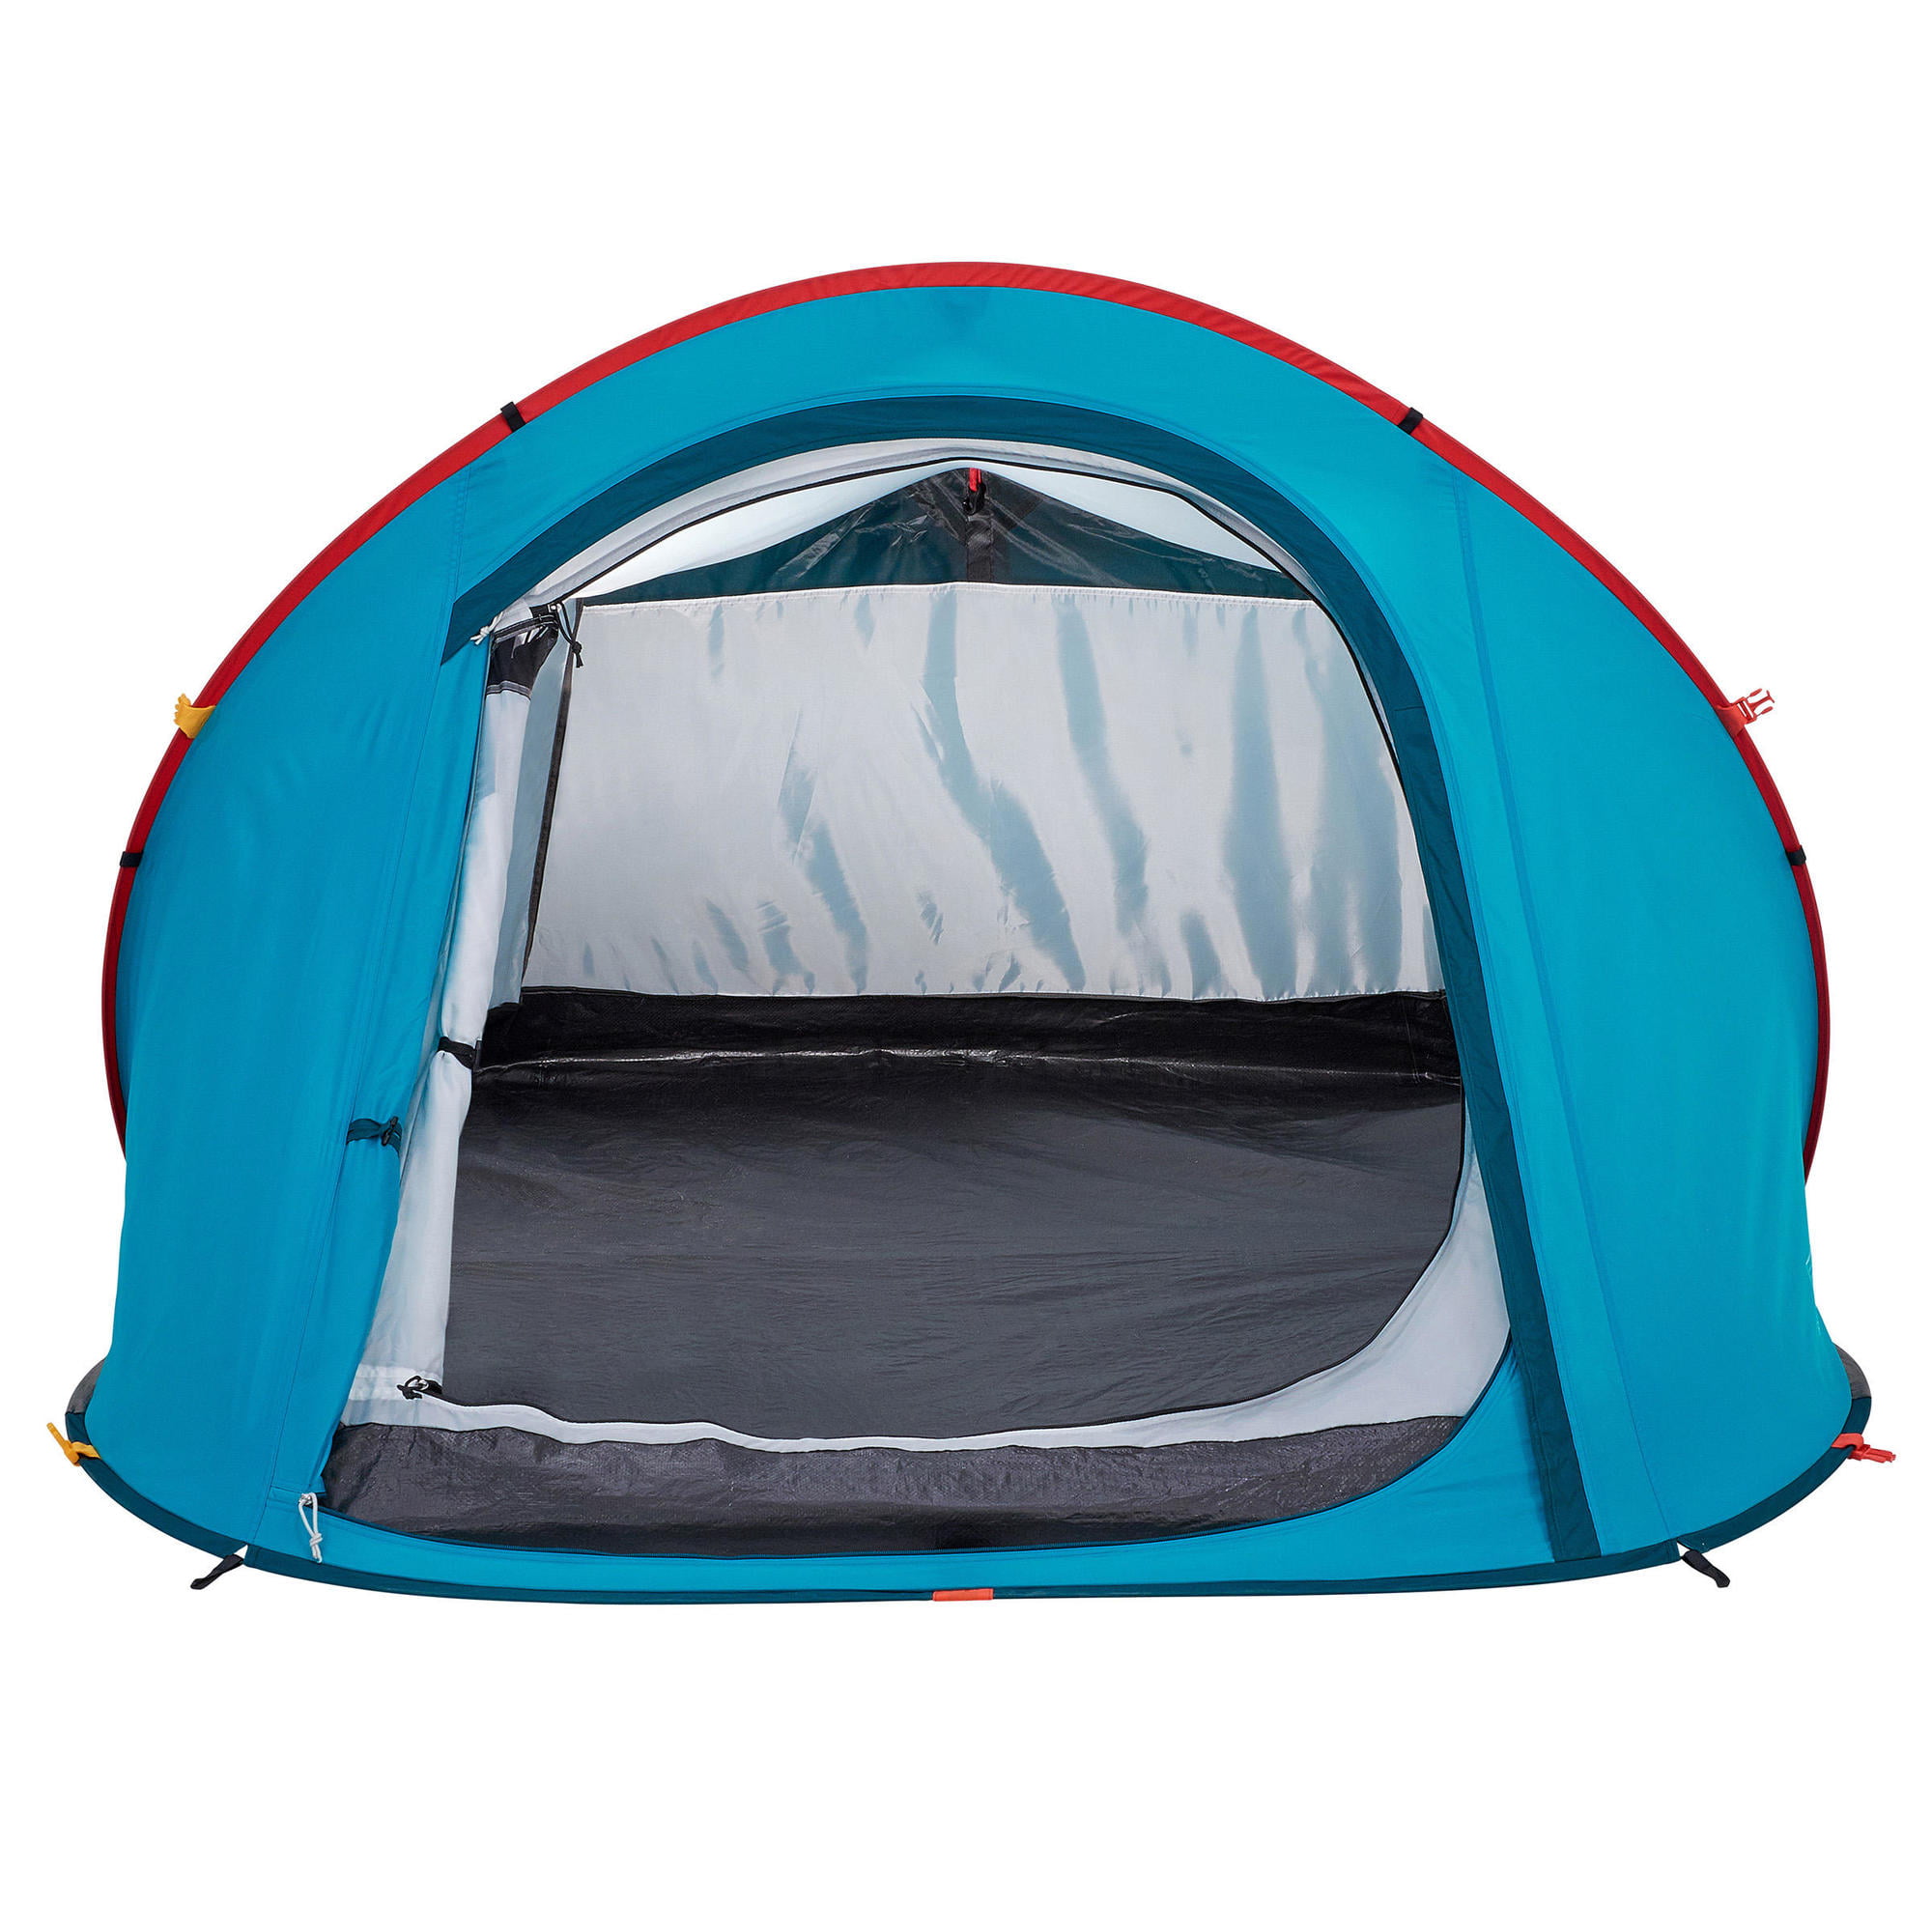 Build on aesthetic attack Decathlon 2 Second, Waterproof Pop Up Camping Tent, 2 Person - Walmart.com